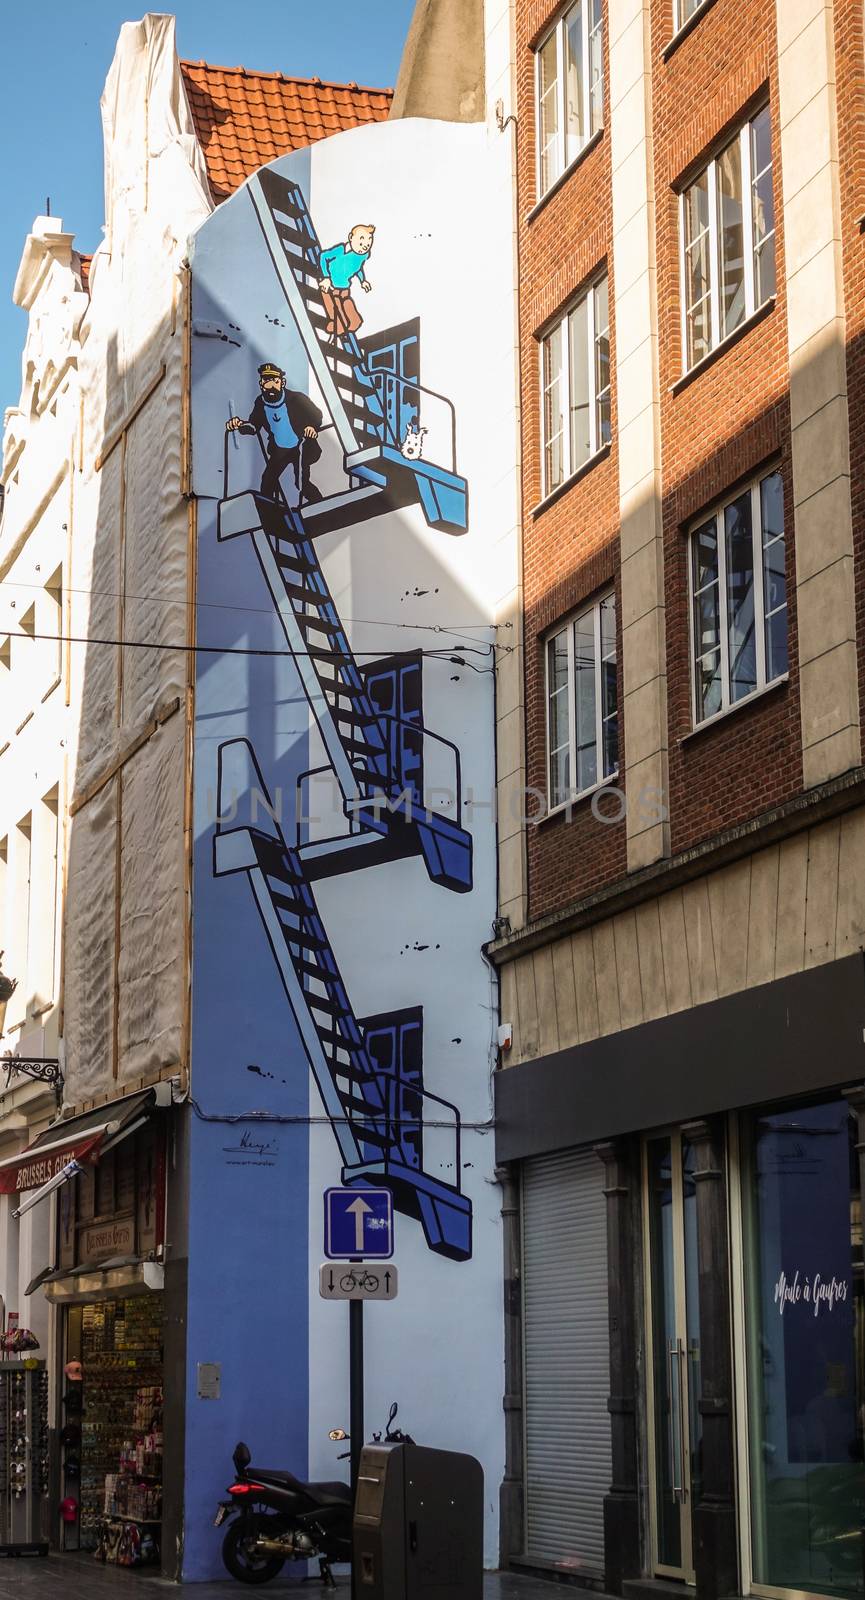 Tintin themed wall painting in Rue de L'Etuve of Brussels, Belgi by Claudine